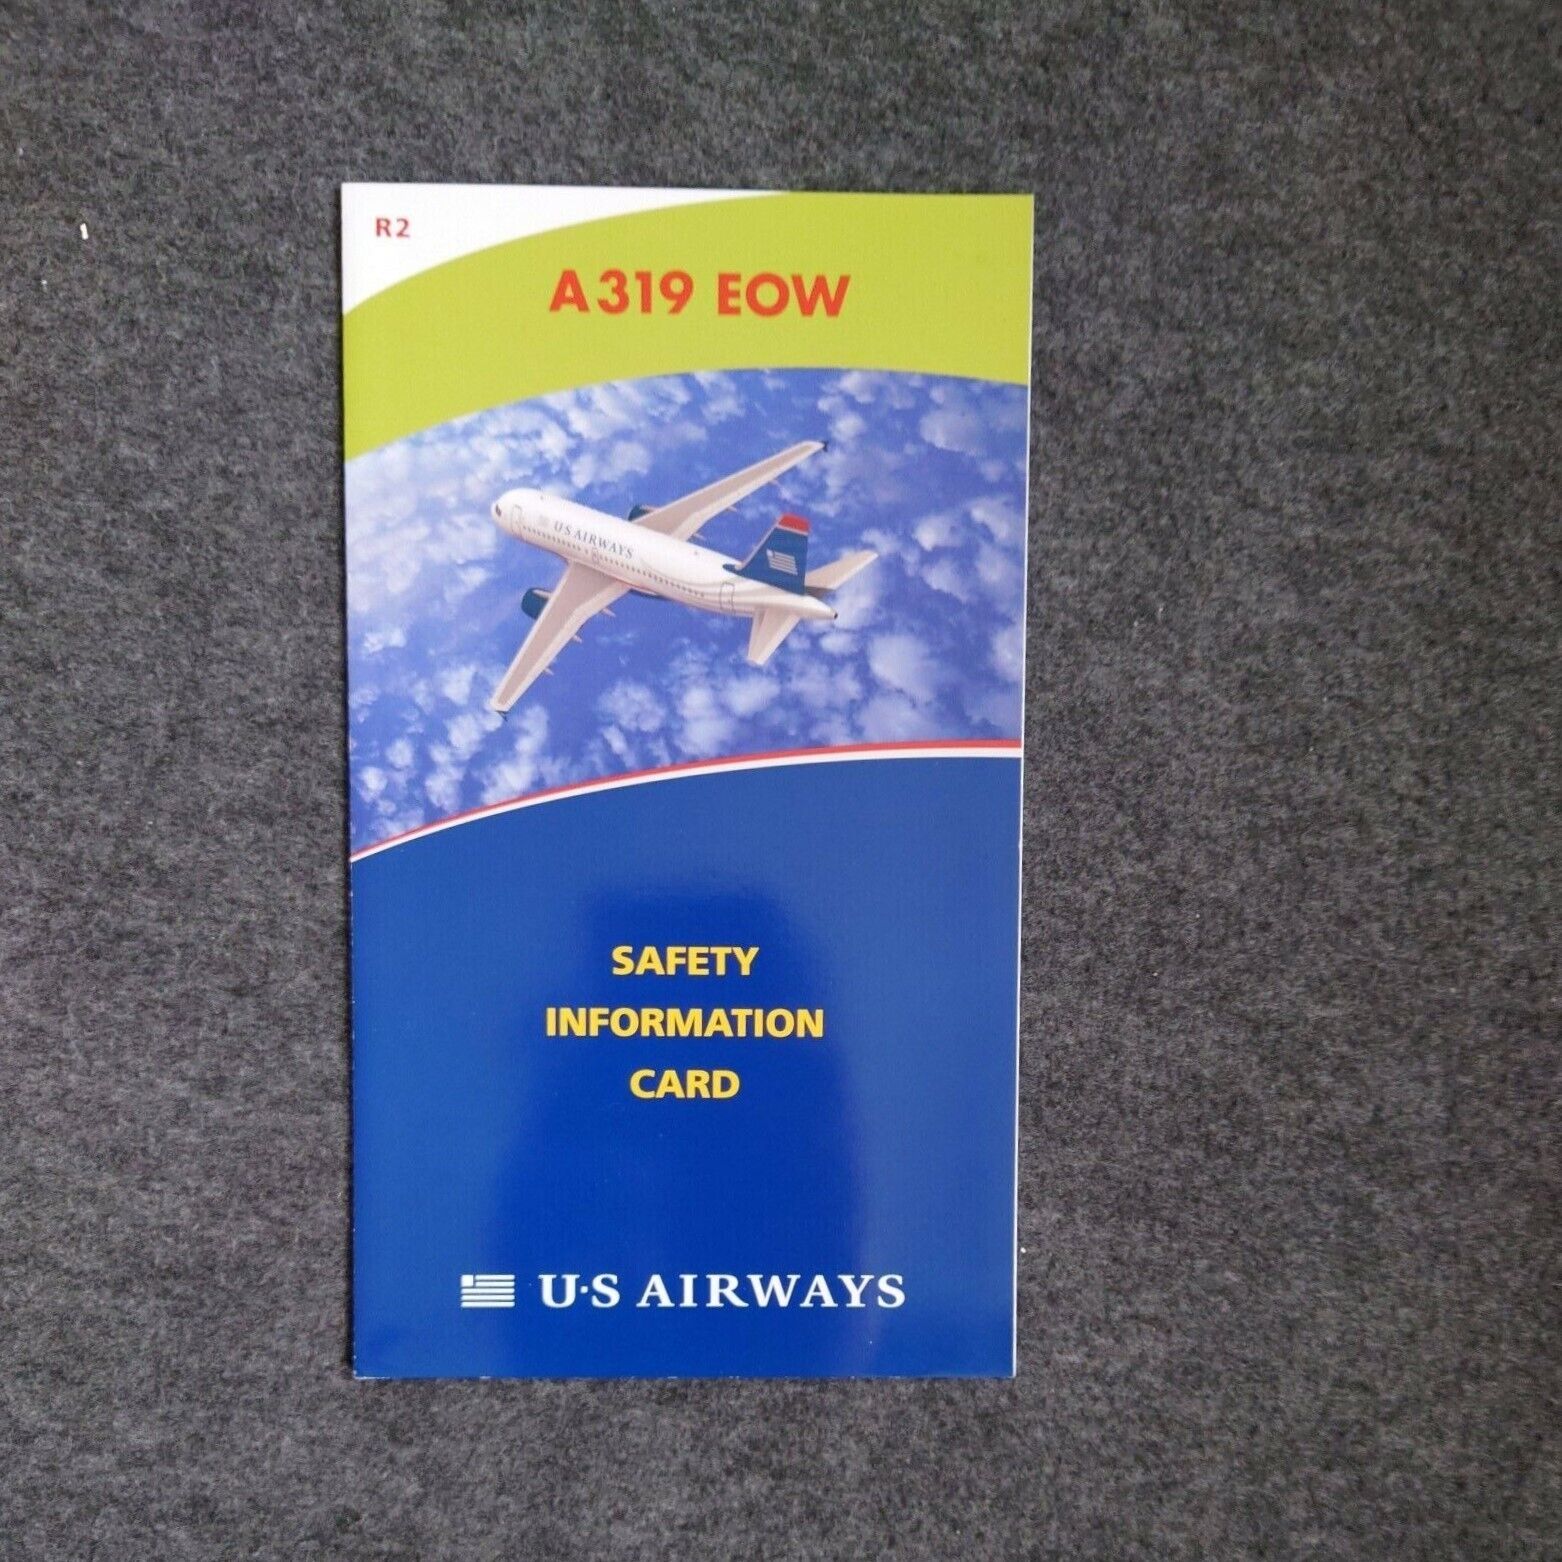 US AIRWAYS SAFETY CARD Airbus A319 EOW Revision R#2 June 2010 319